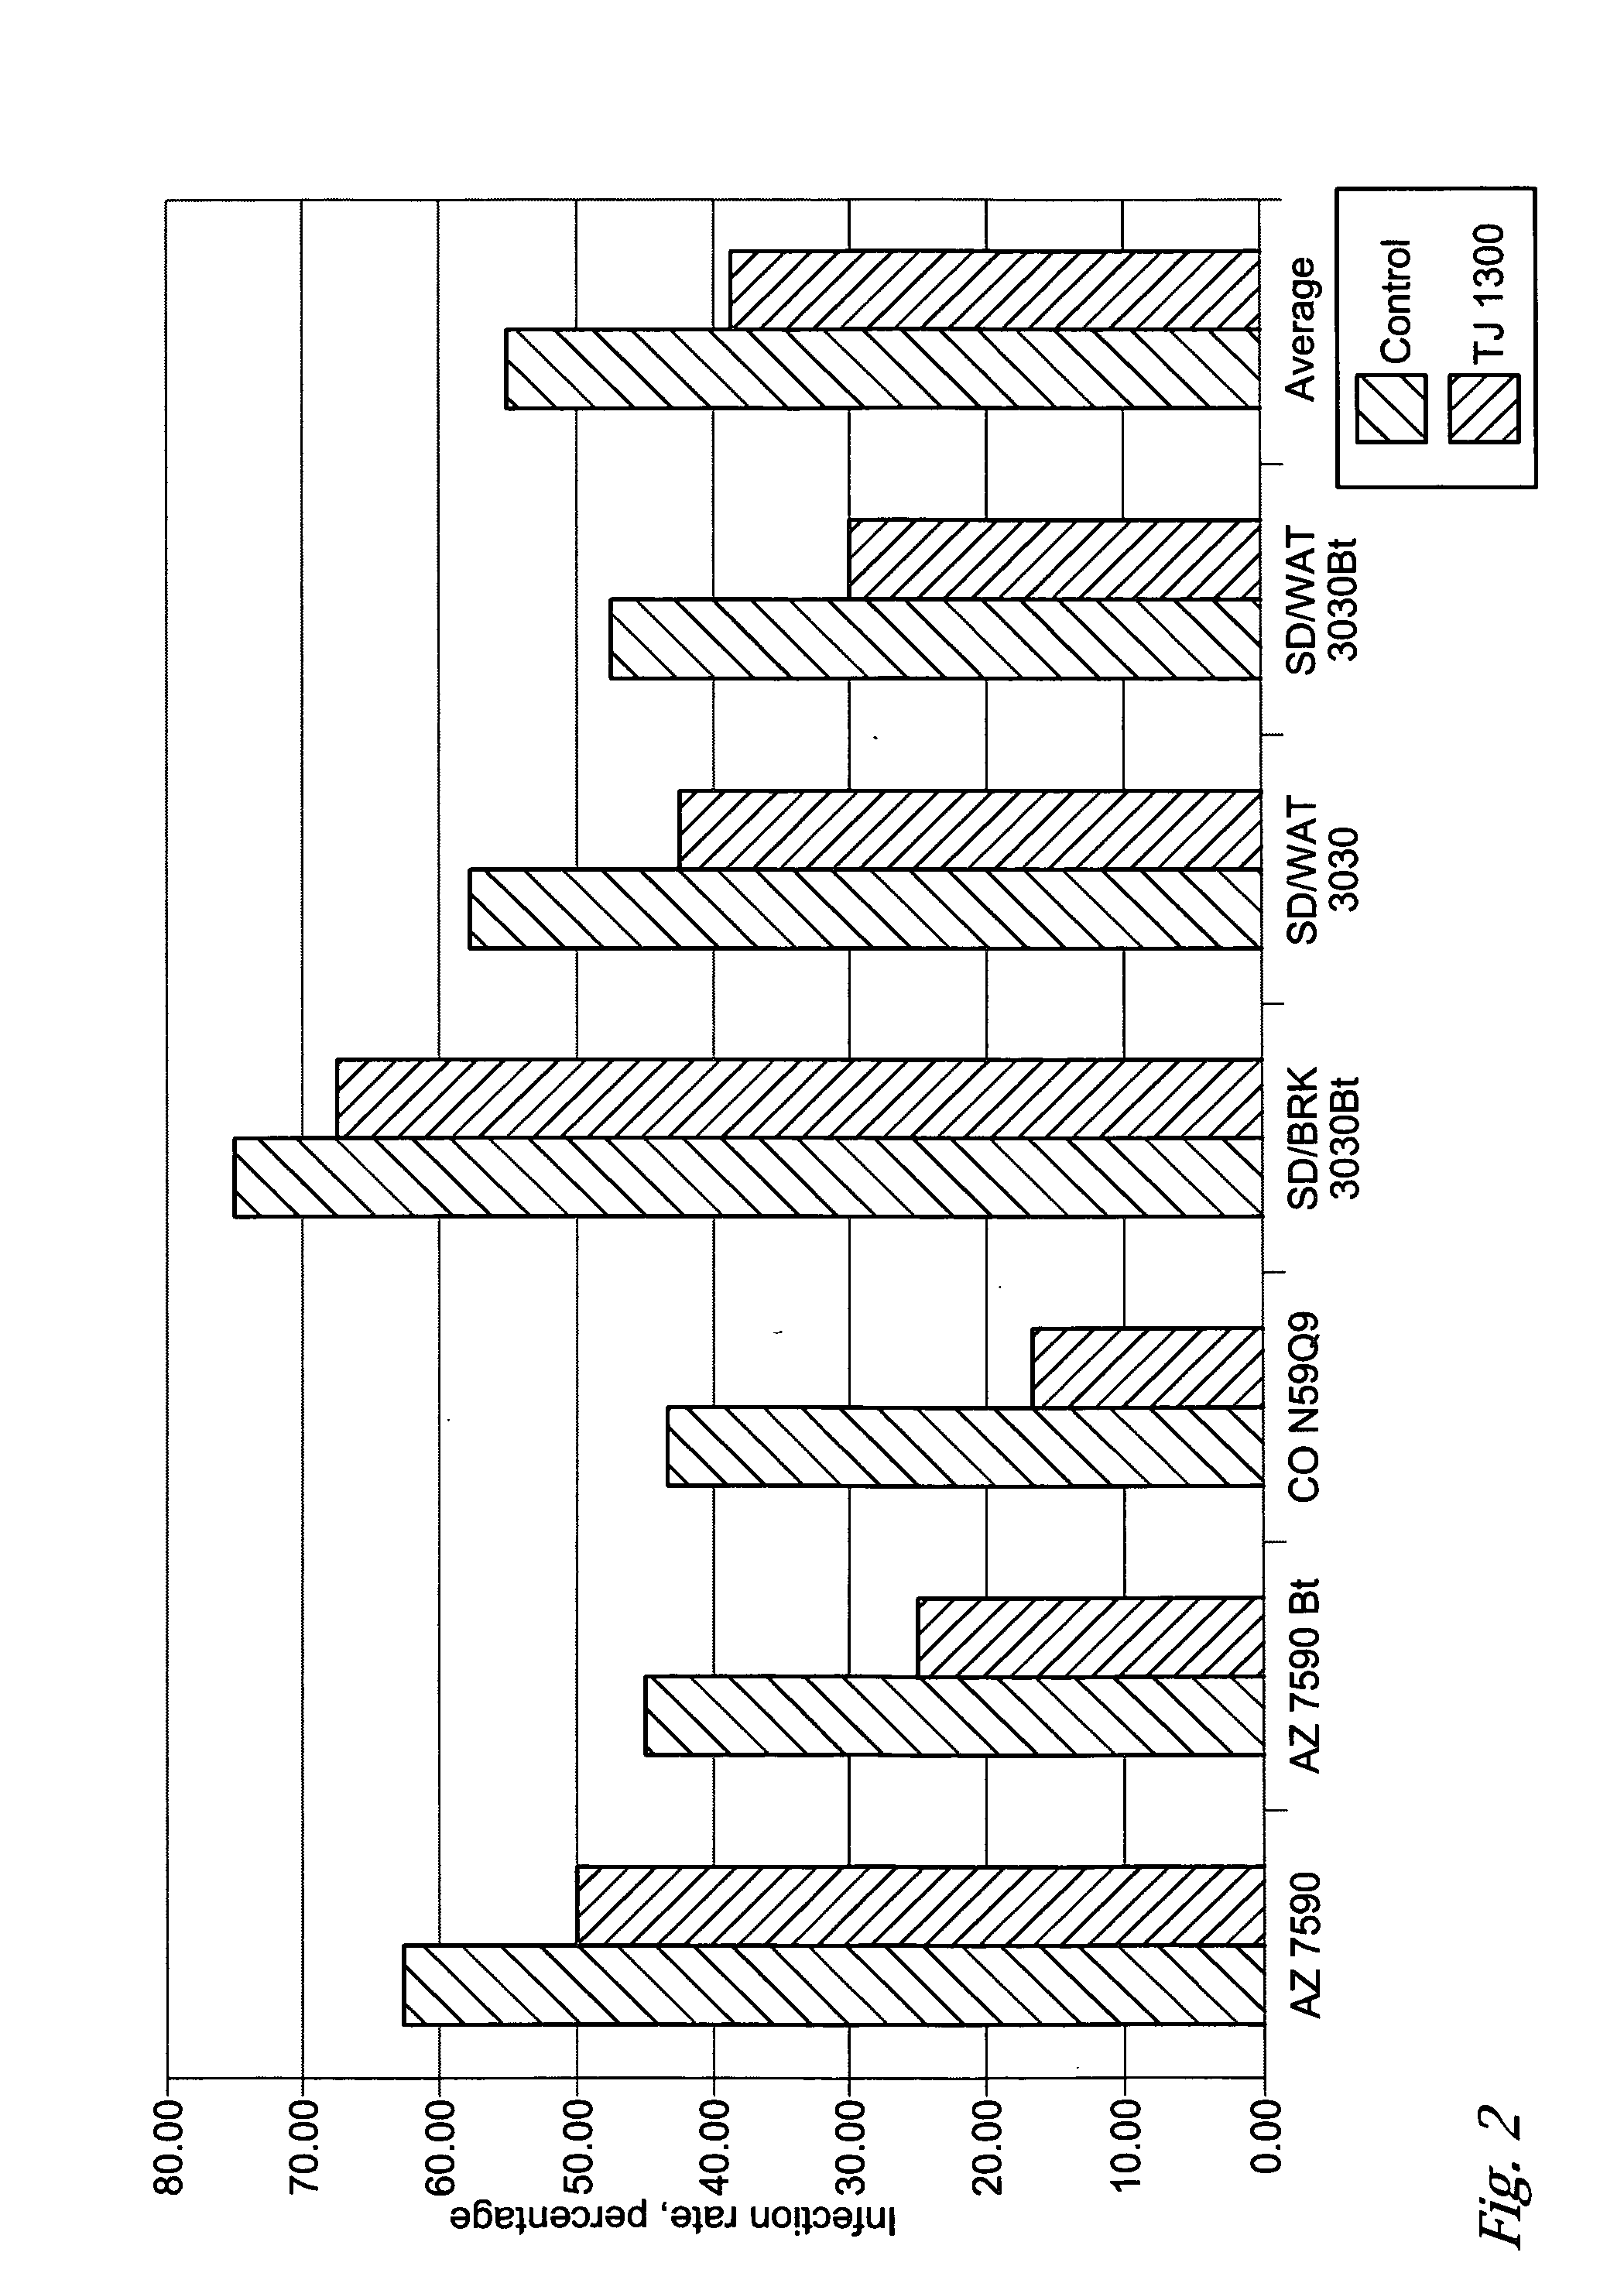 Plant seed assemblies comprising fungal/ bacterial antagonists